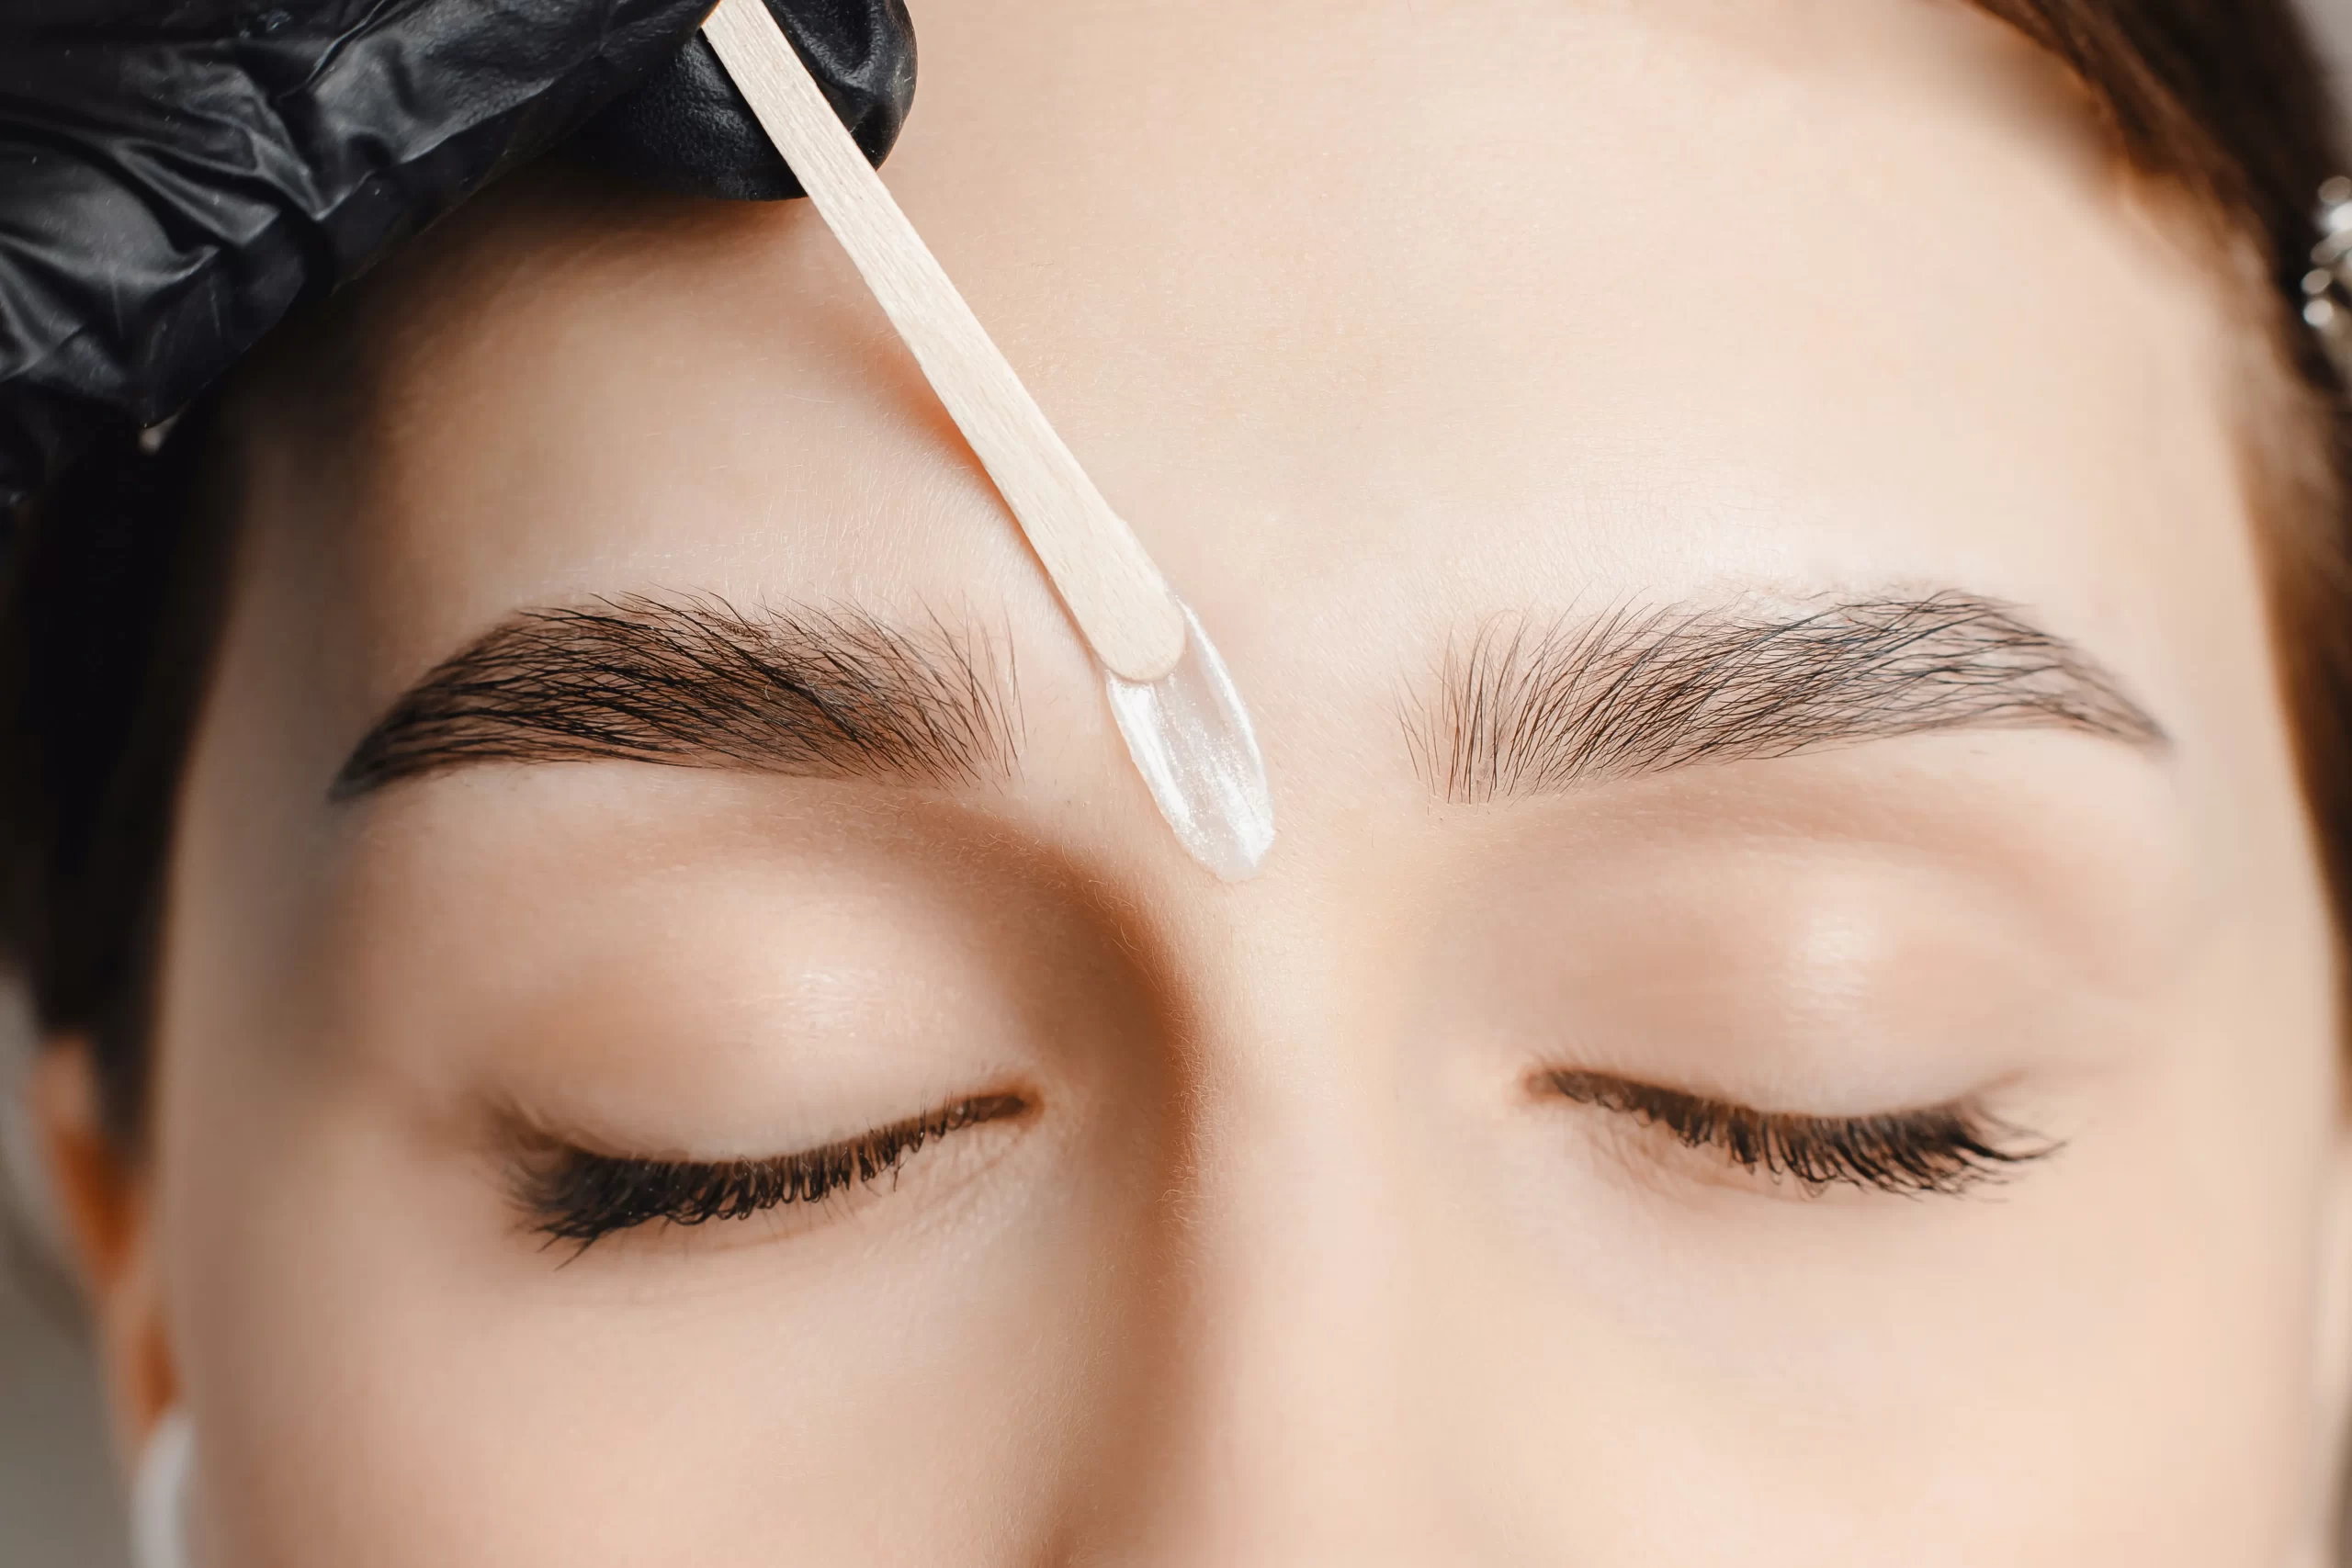 The Beauty Experts: Eyebrow Shaping Services